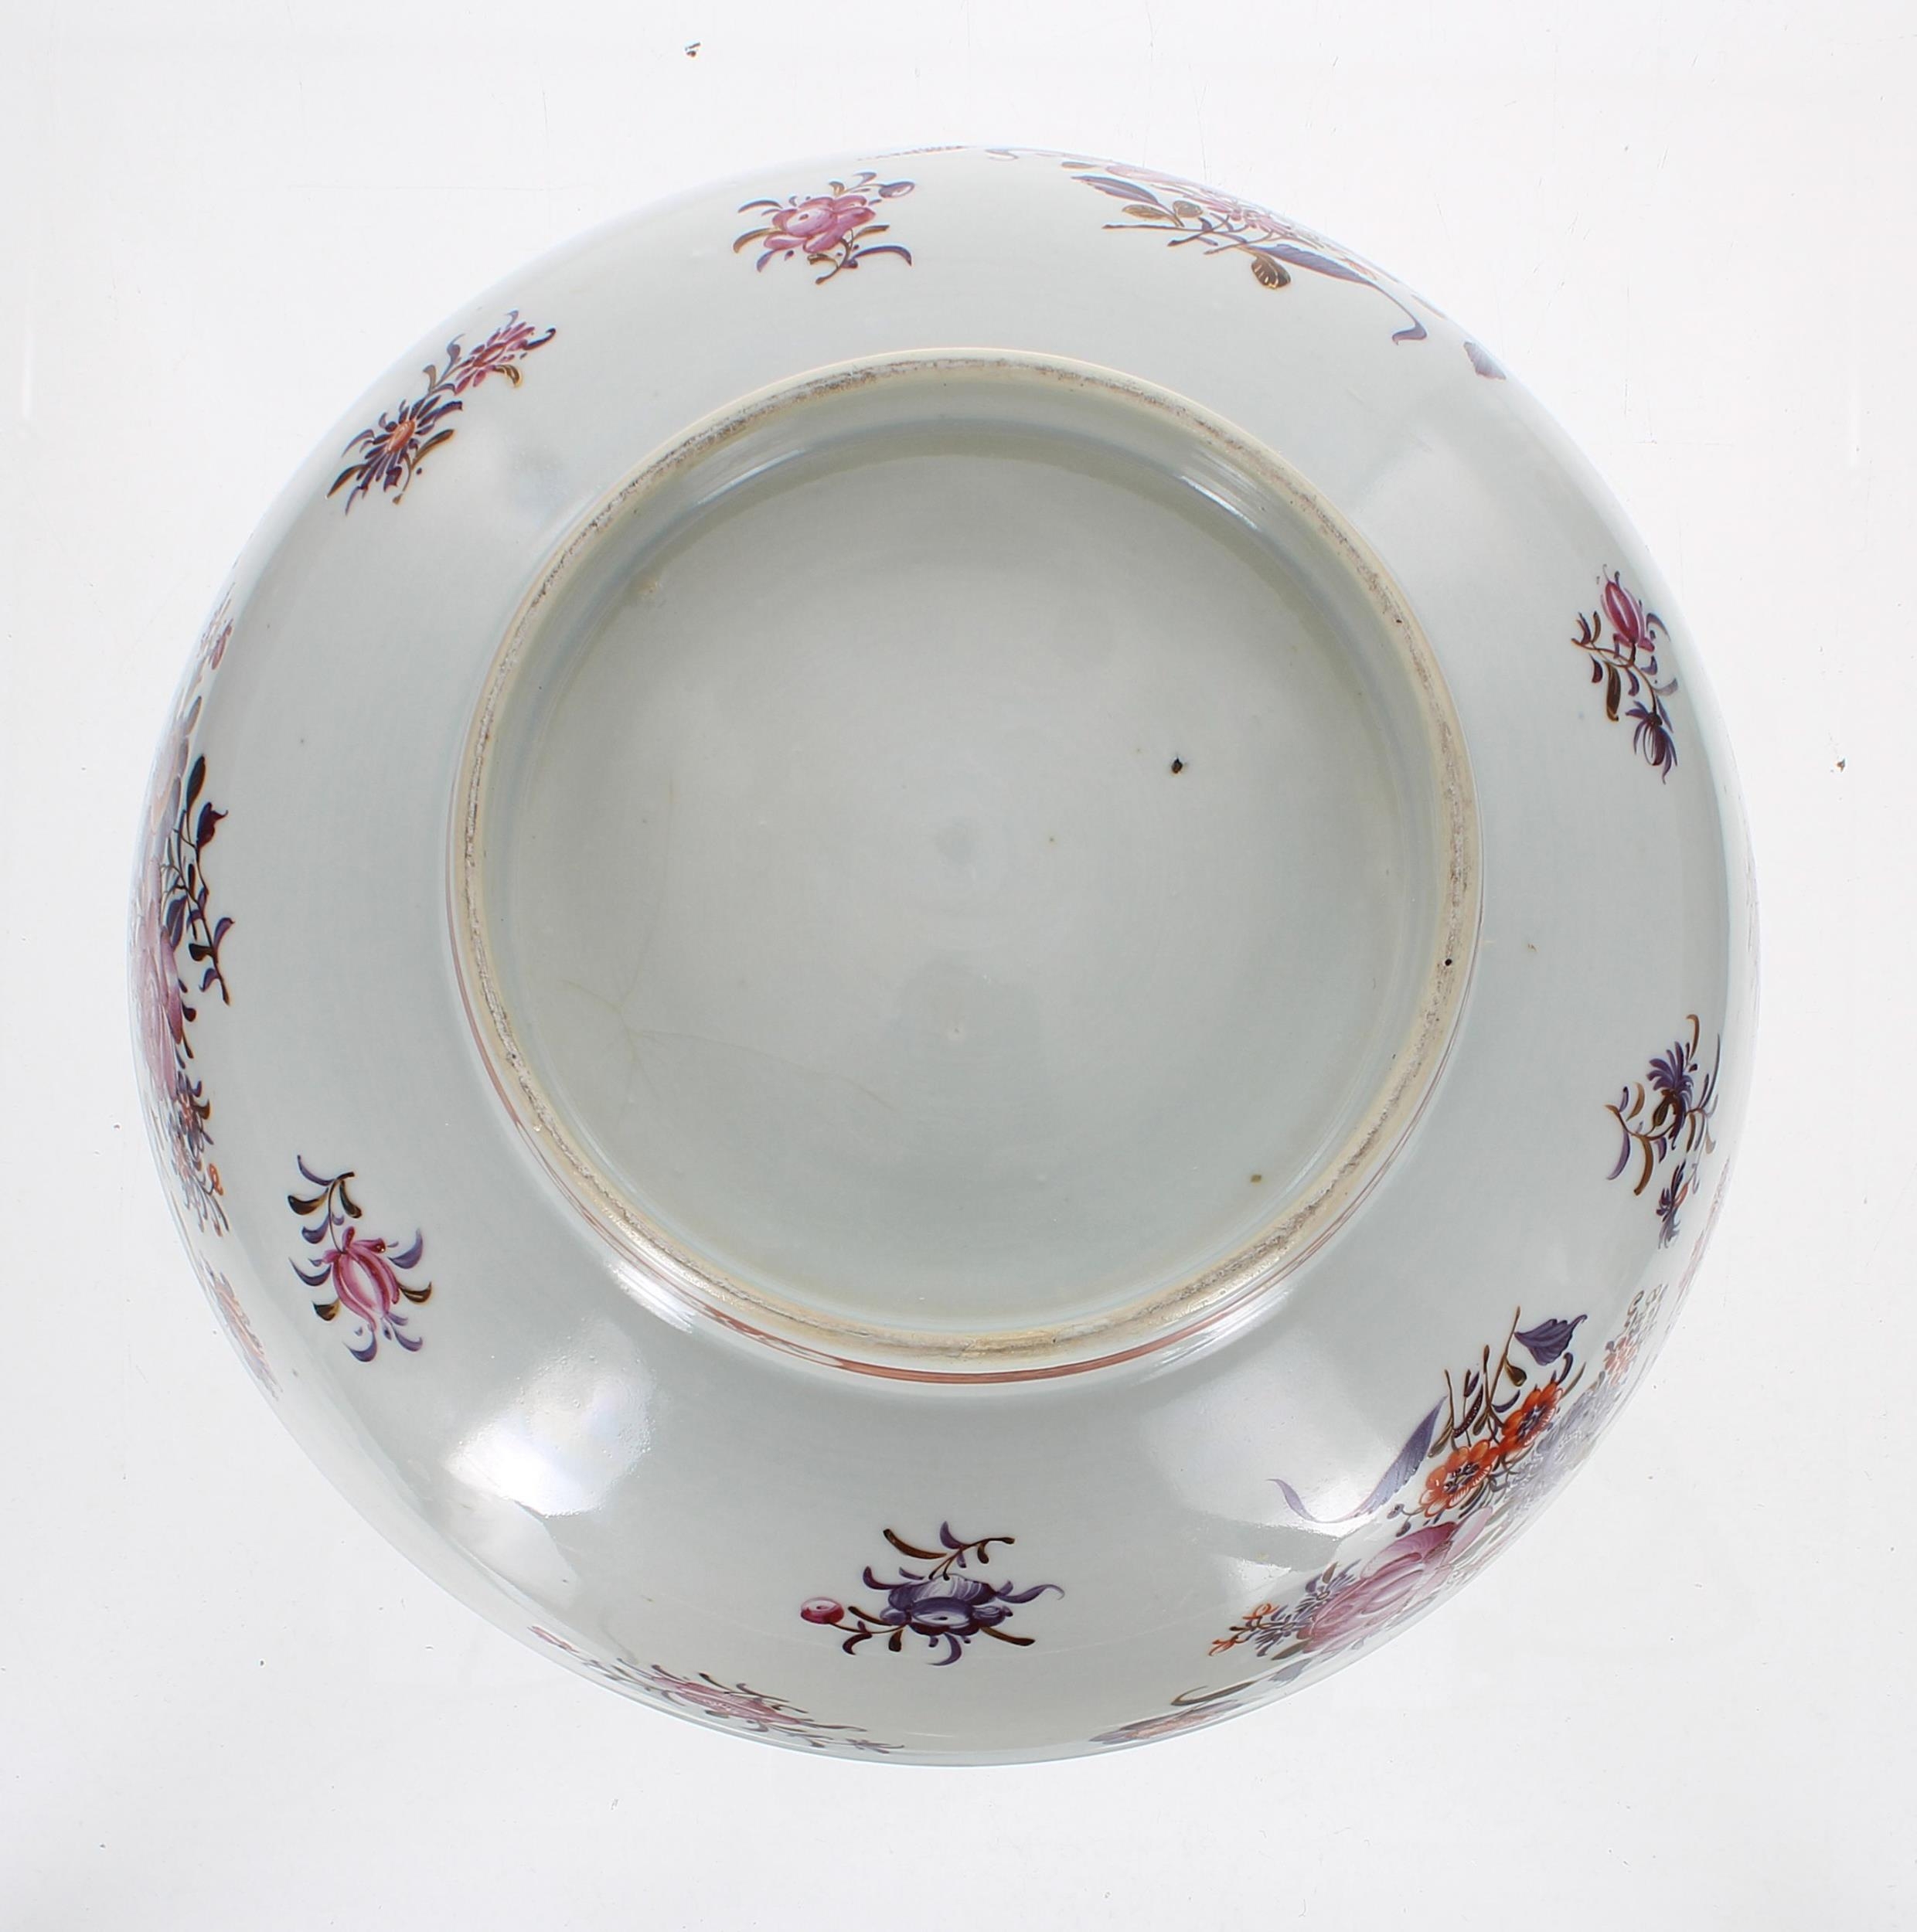 Chinese export porcelain famille rose circular punch bowl, painted with floral sprays with foliate - Image 5 of 5